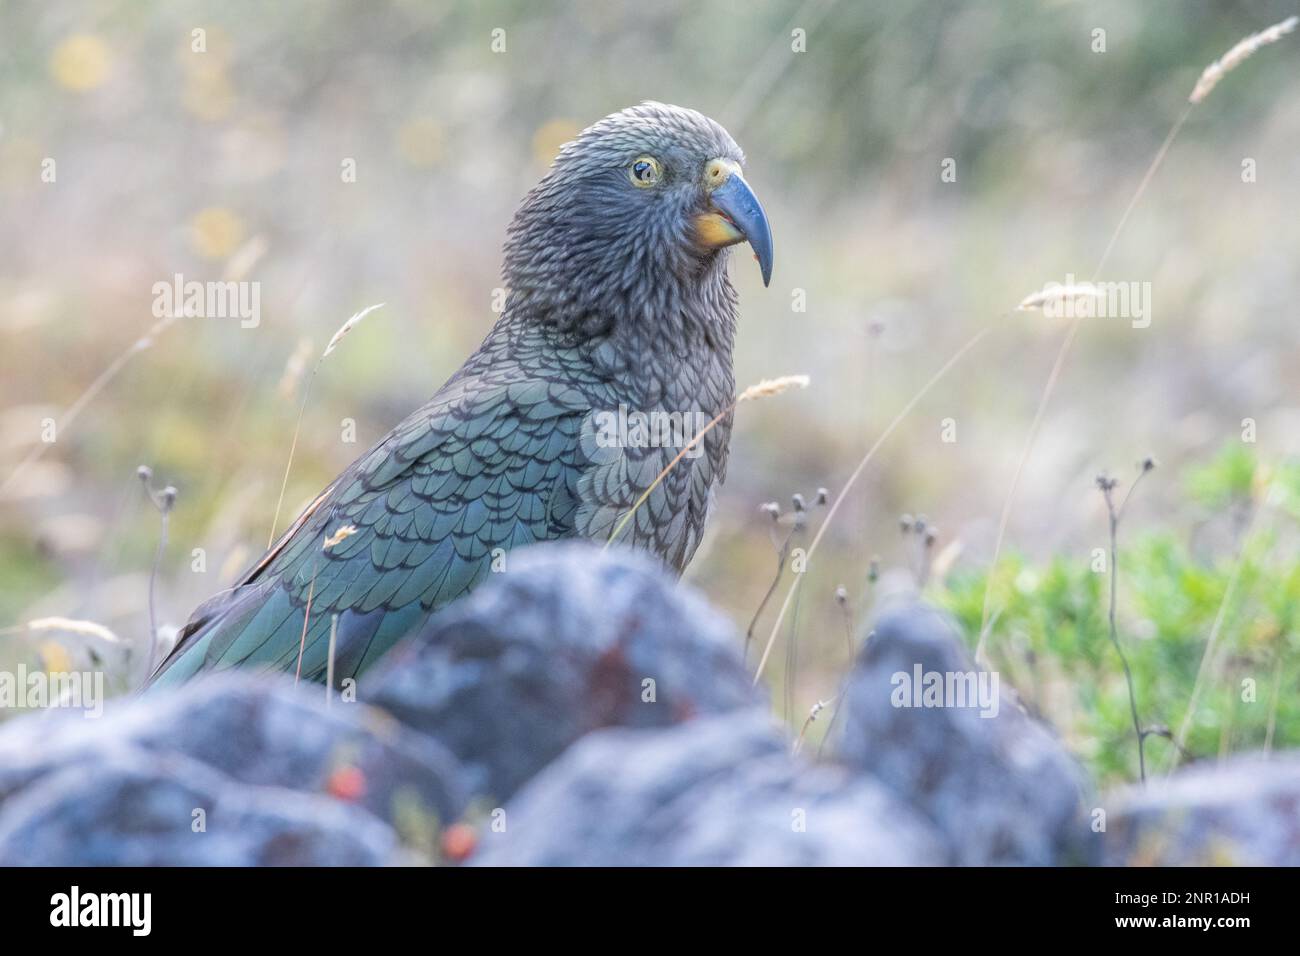 Kea (Nestor notabilis) an endangered species of parrot endemic to New Zealand, one of the iconic wildlife species of the South Island & Southern alps. Stock Photo